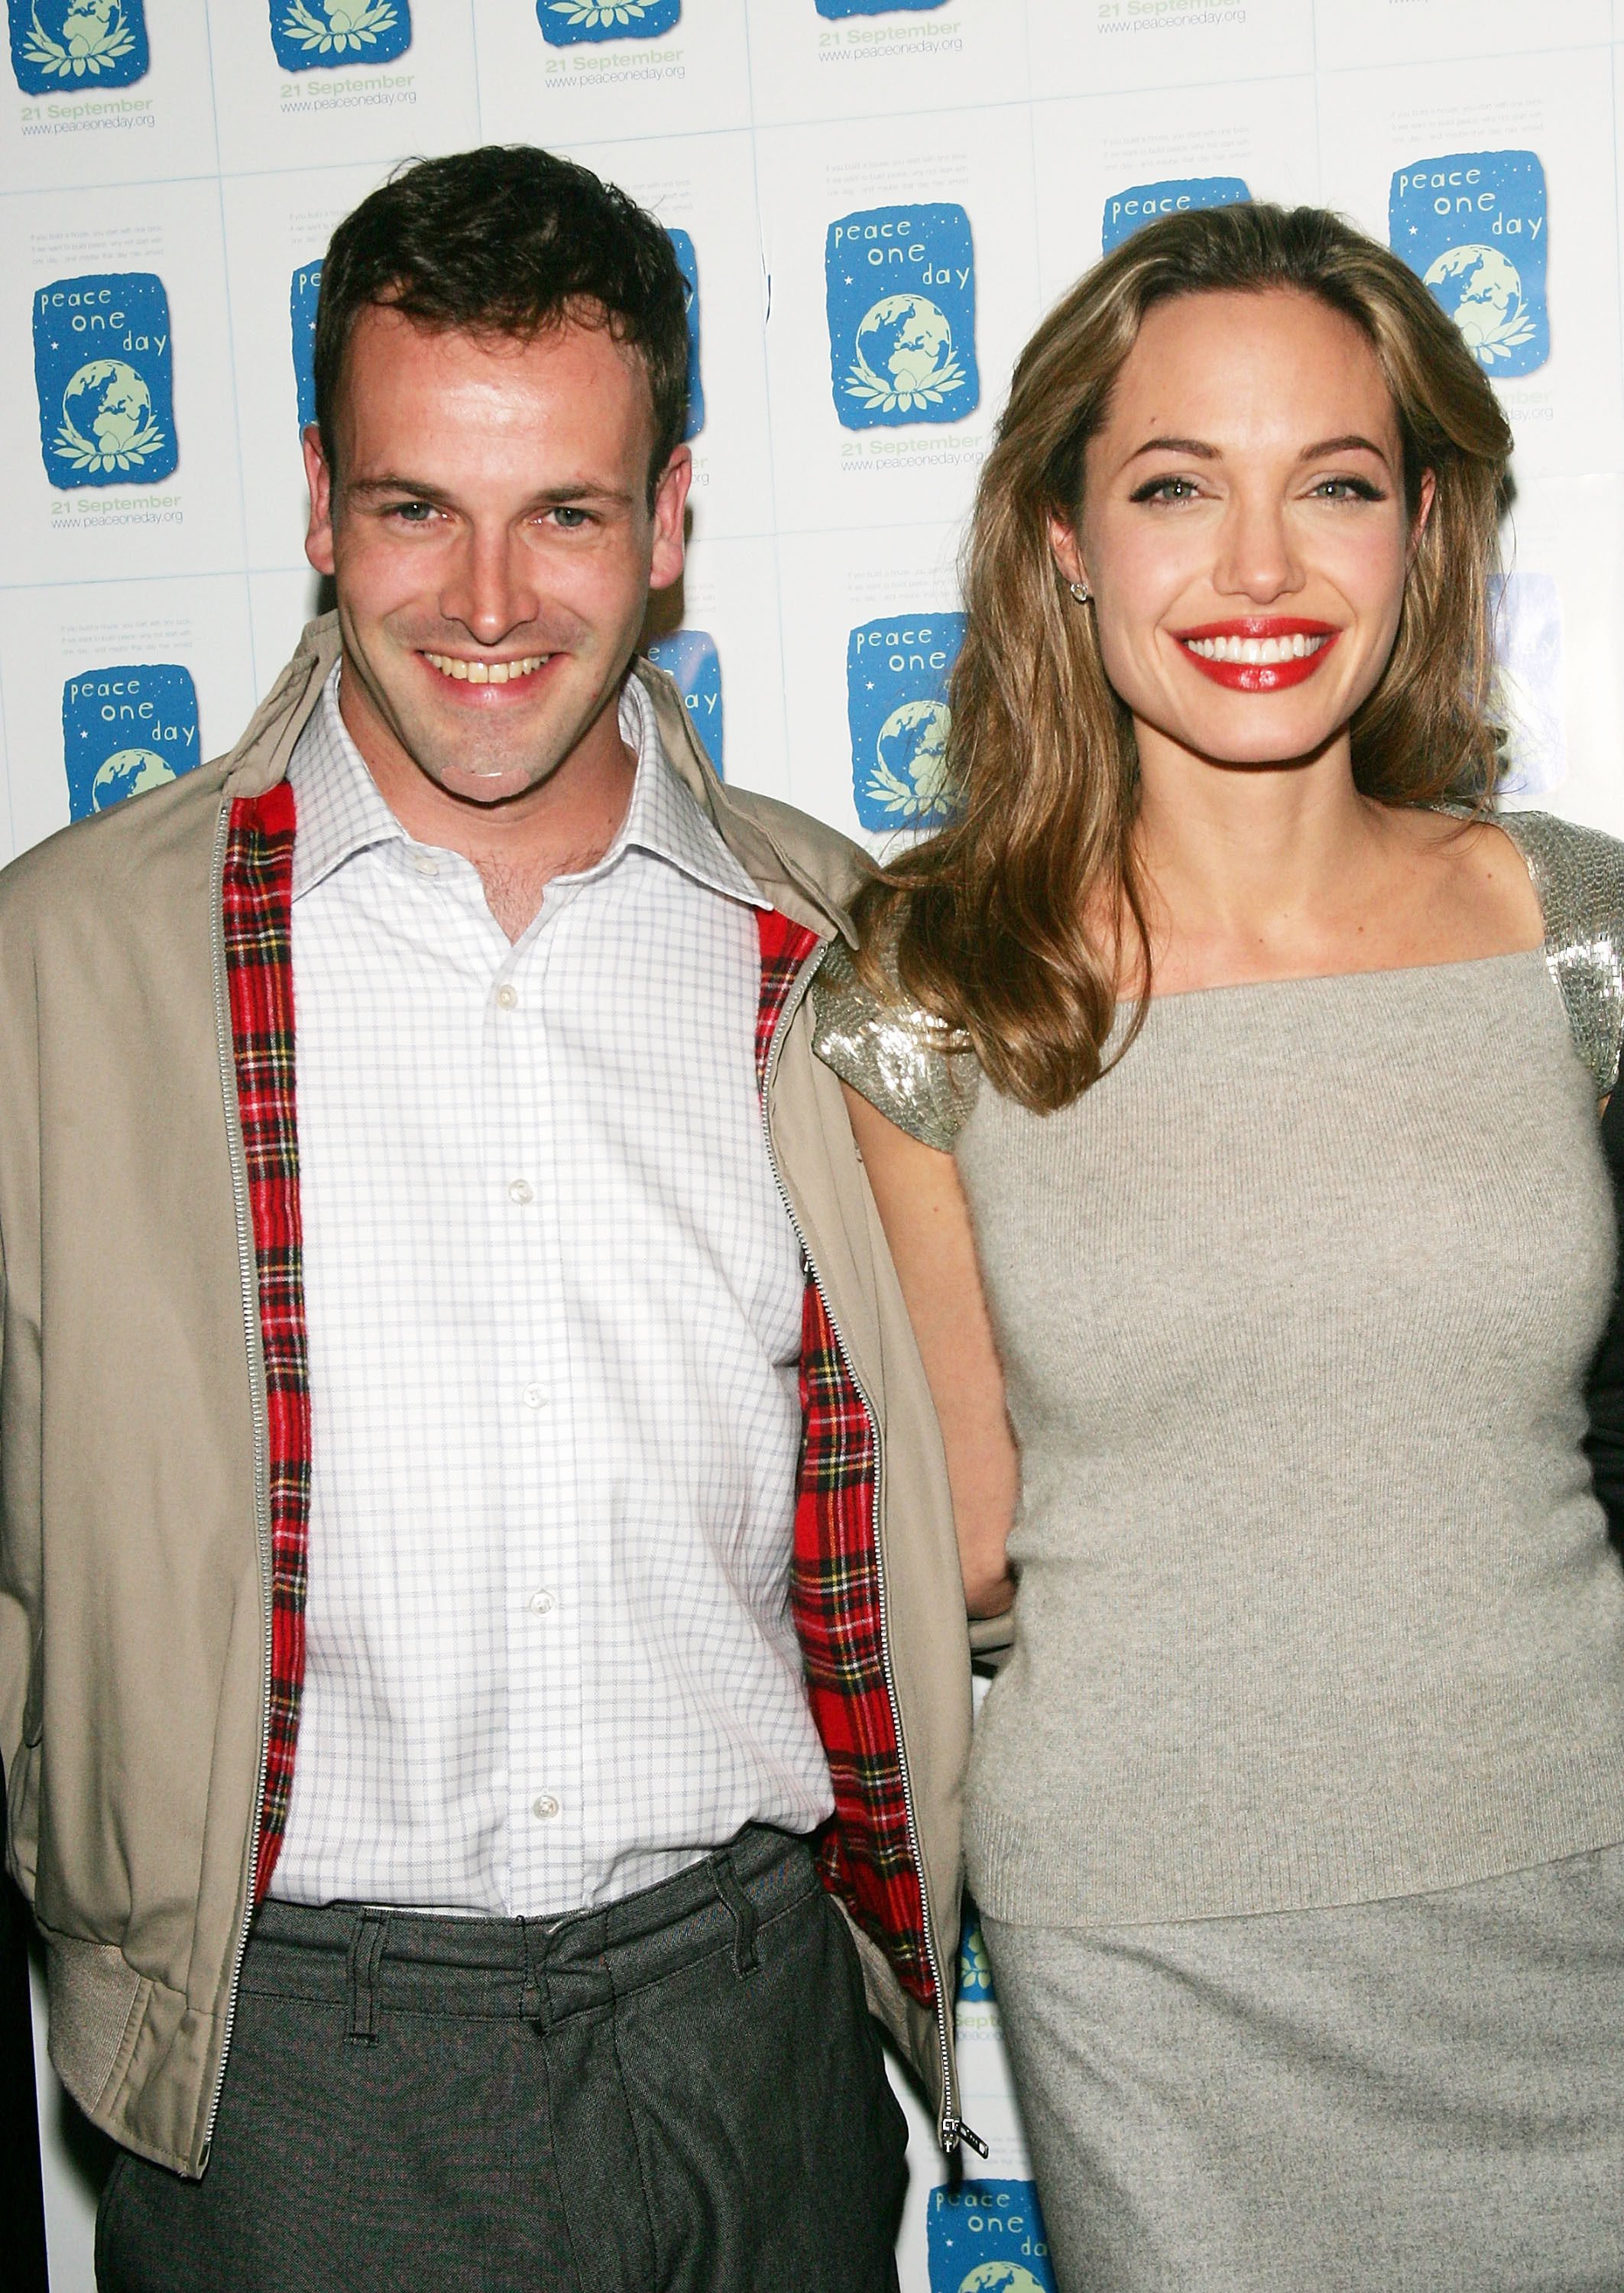 Angelina Jolie and her ex-husband Jonny Lee Miller pictured together in 2005 – the pair have remained good friends. Photo: Getty Images